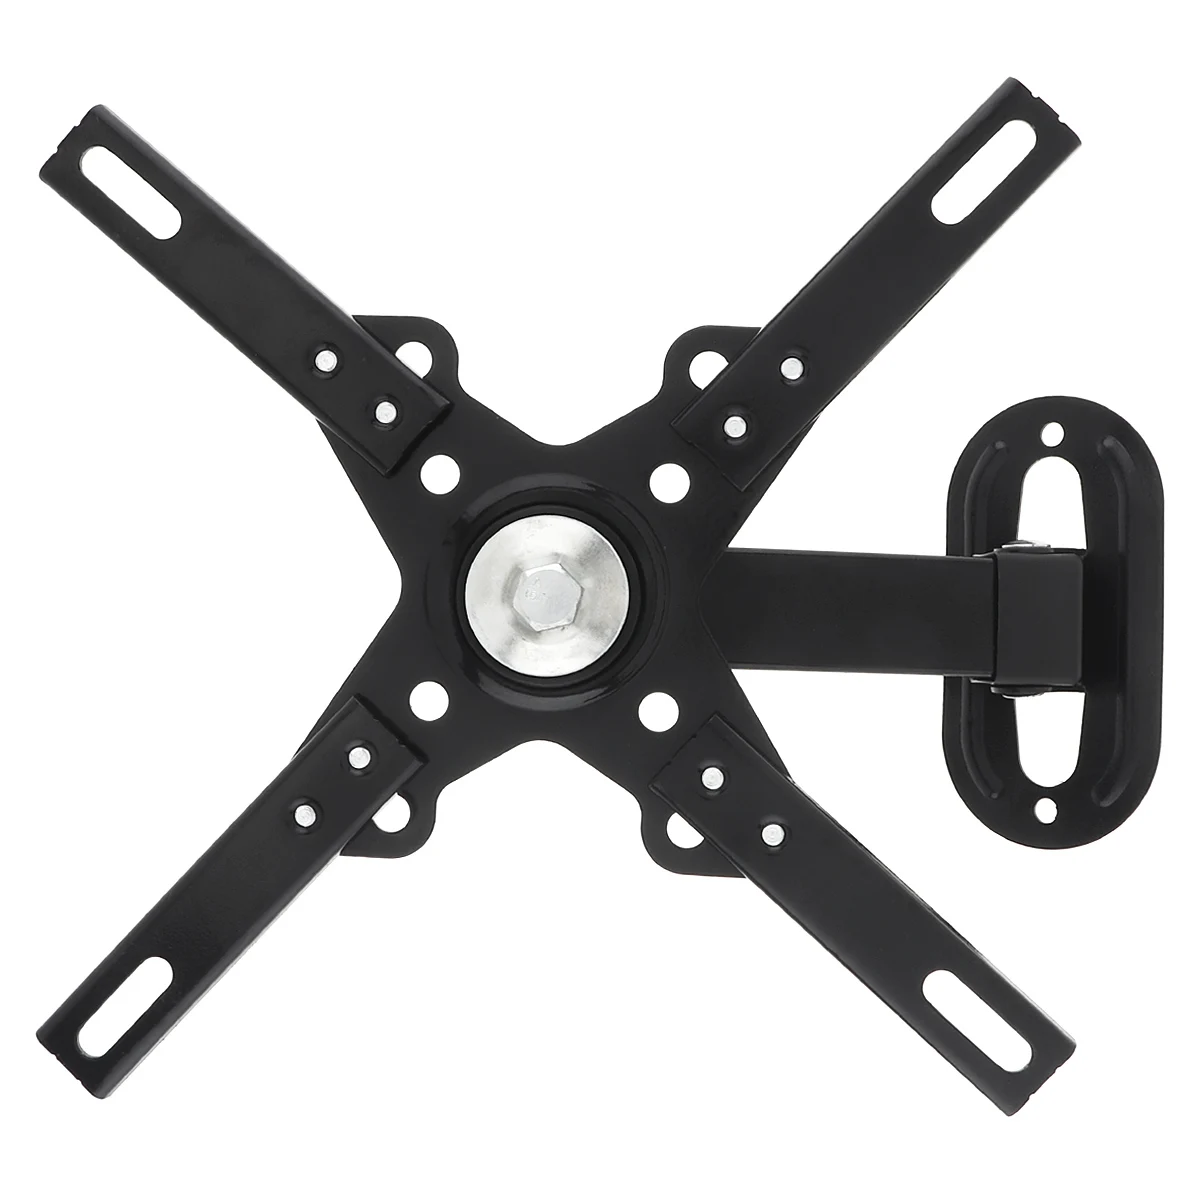 Universal Adjustable TV Wall Mount Rotated Full Motion TV Bracket Holder Monitor Support For 14-42 Inch LED LCD Panel